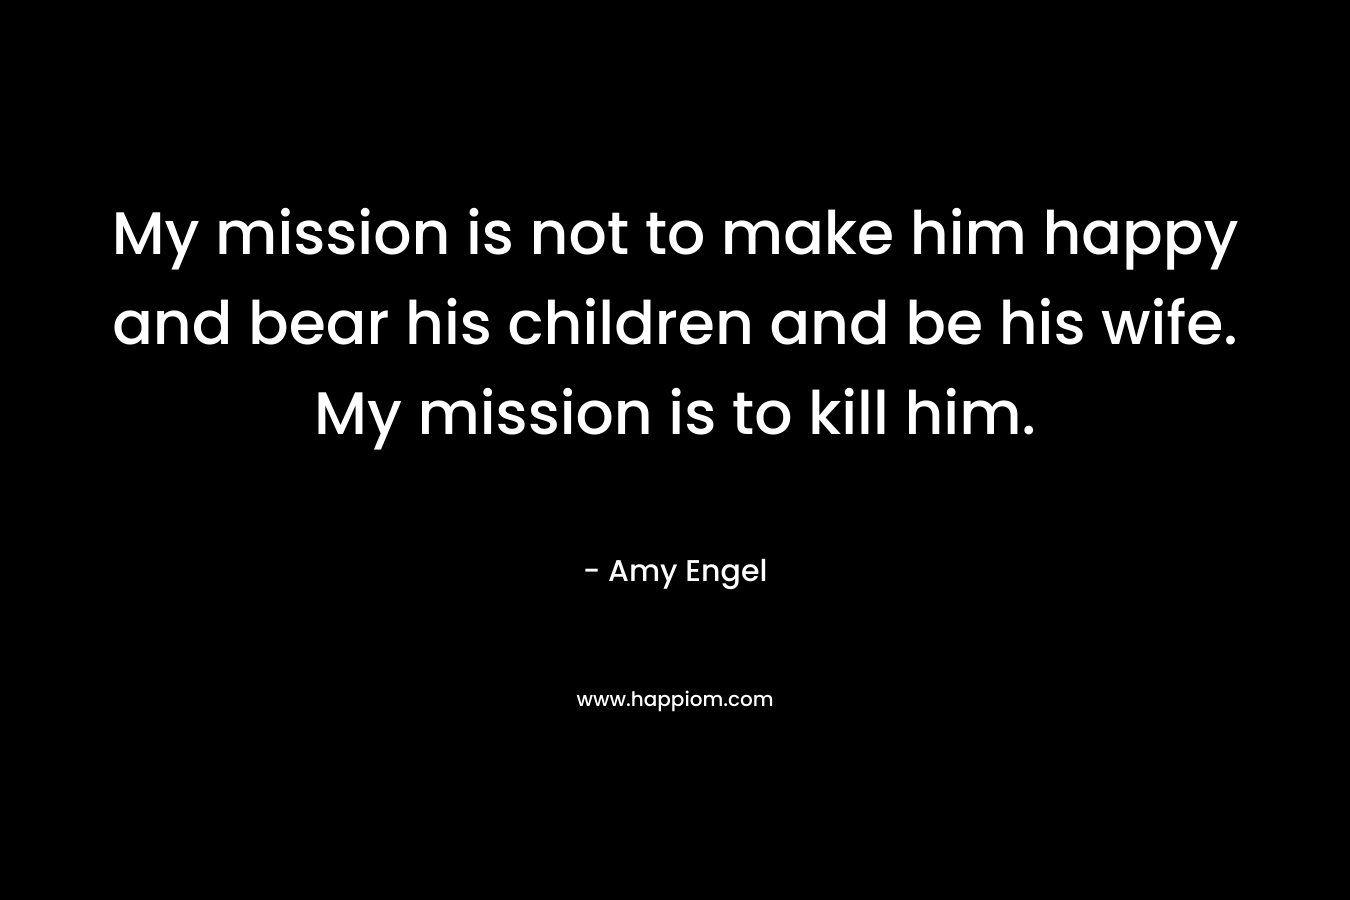 My mission is not to make him happy and bear his children and be his wife. My mission is to kill him. – Amy Engel